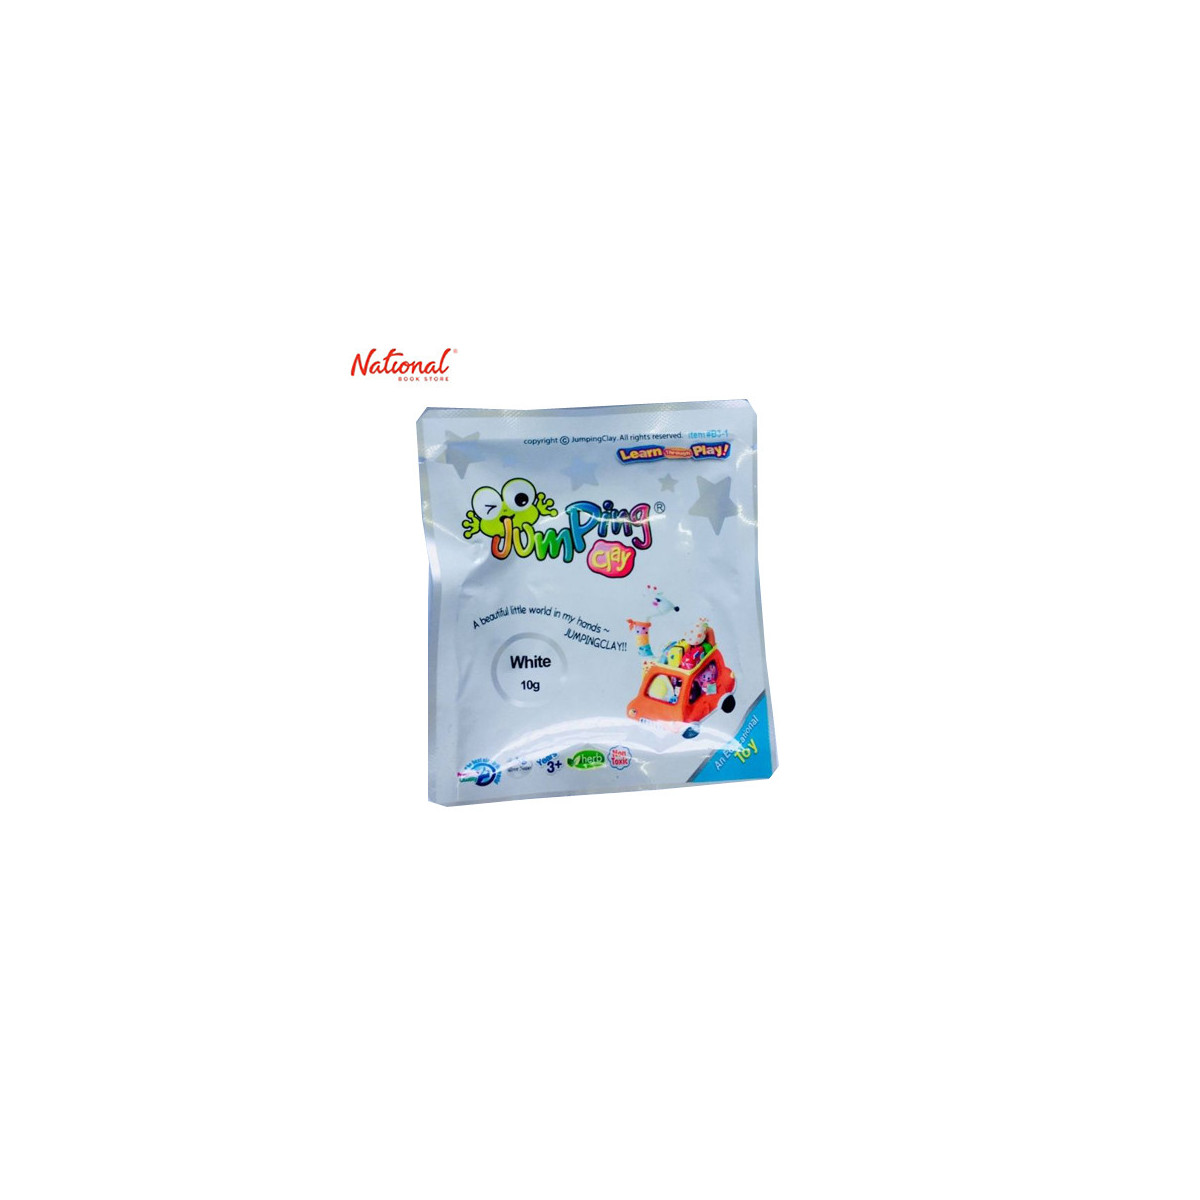 Jumping Clay Air Dry Modelling Clay B3-1 White 10 grams